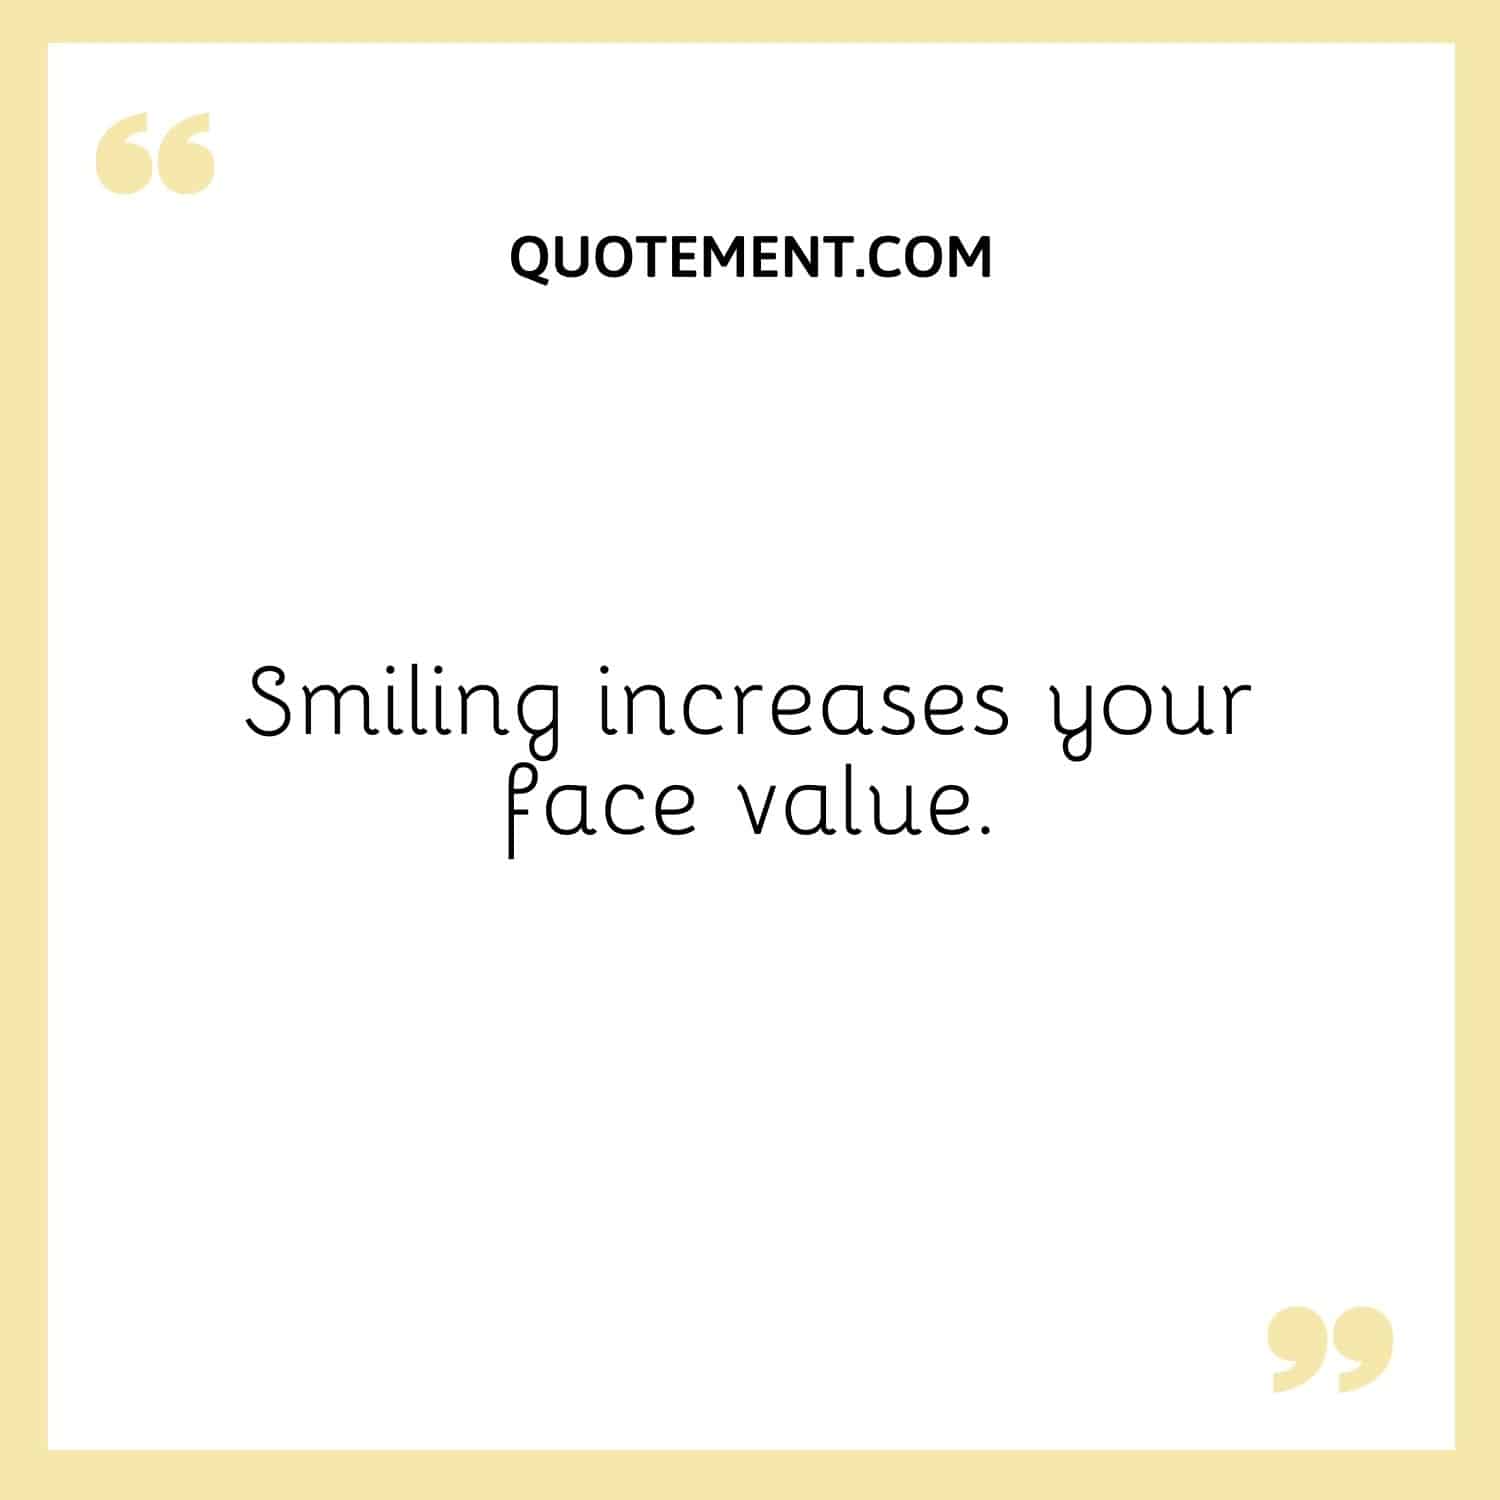 Smiling increases your face value.